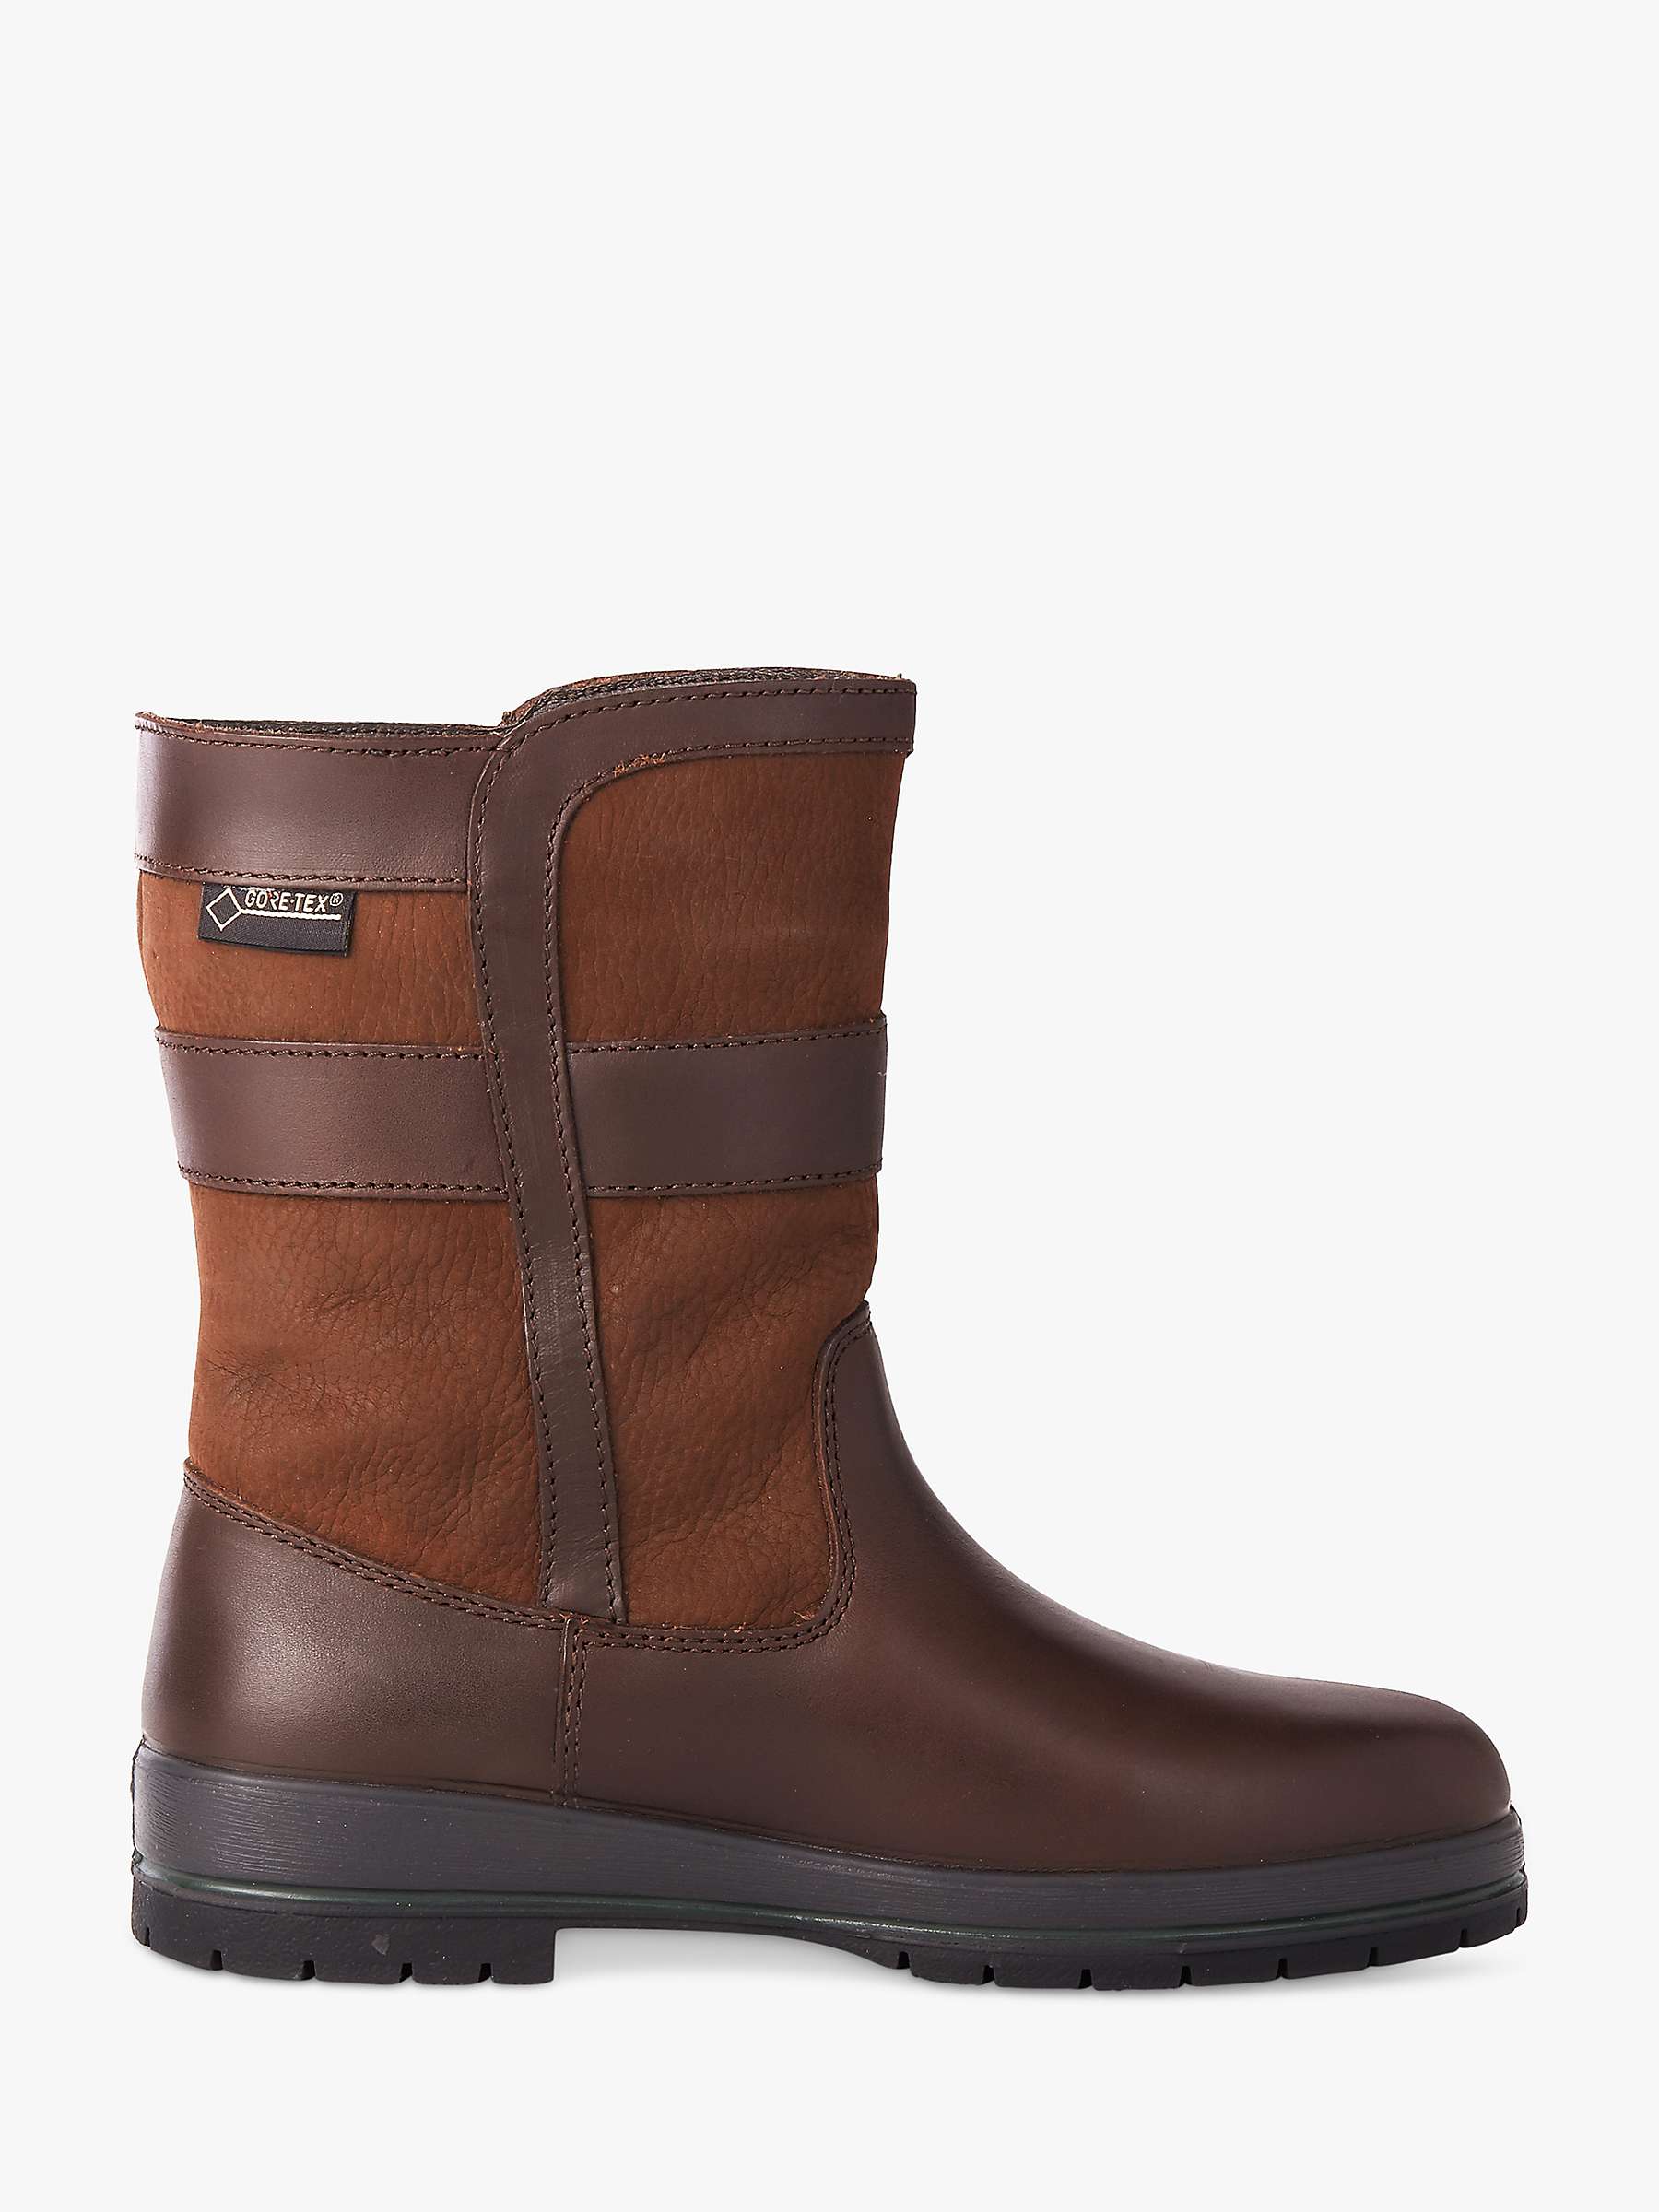 Buy Dubarry Roscommon Leather Ankle Boots, Walnut Online at johnlewis.com